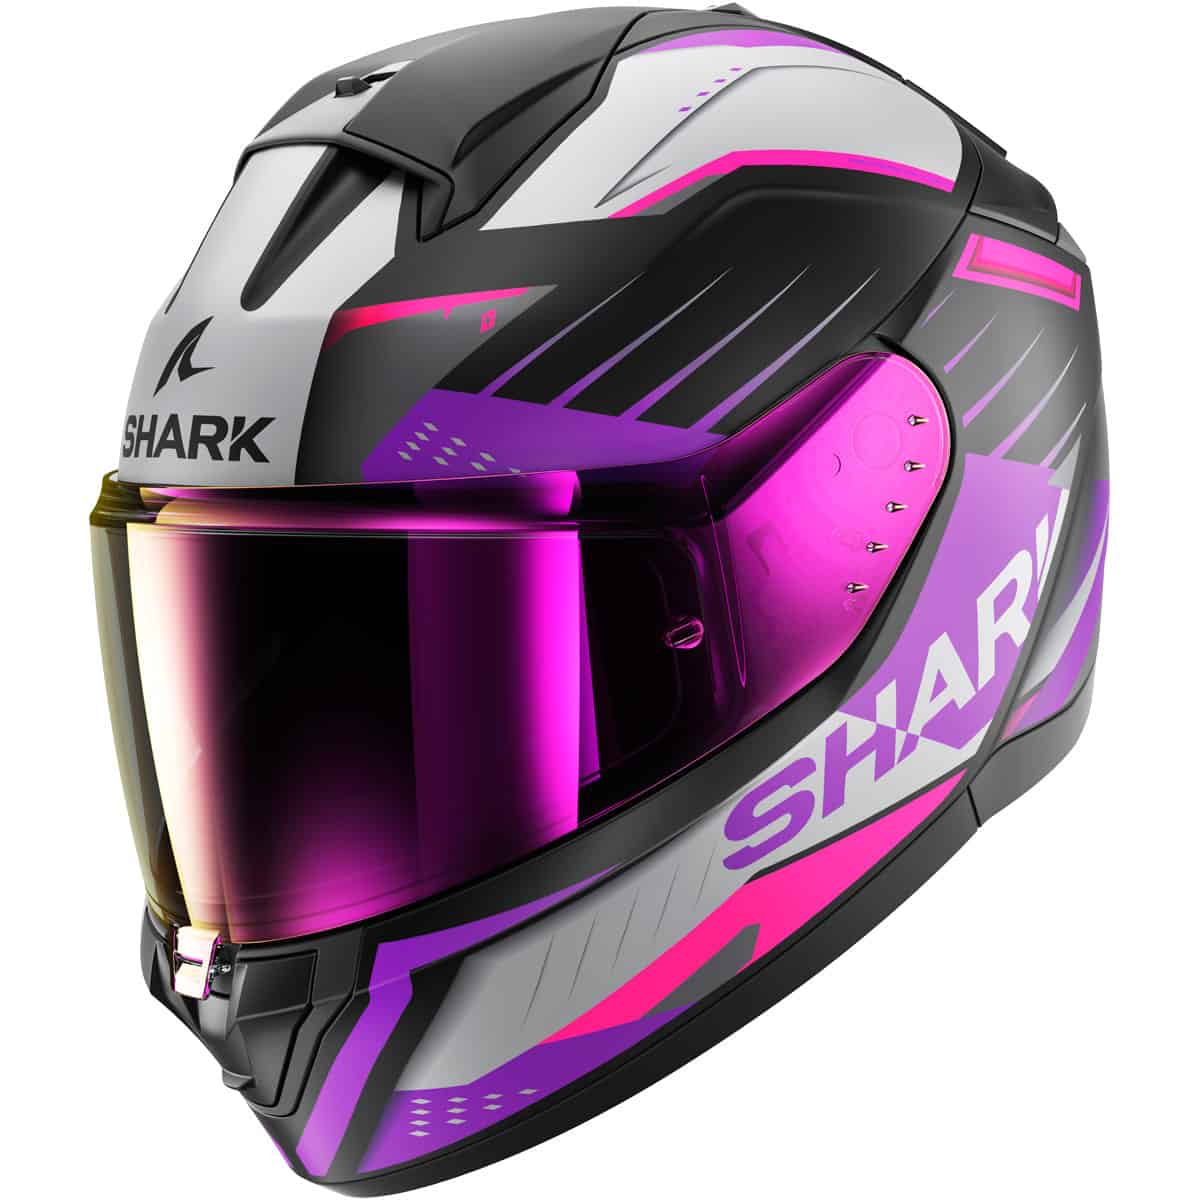 Experience a ride like no other with the Shark Ridill 2 Helmet. This ladies helmet features an all-new design and exceptional features, combining streetwear look air inlets